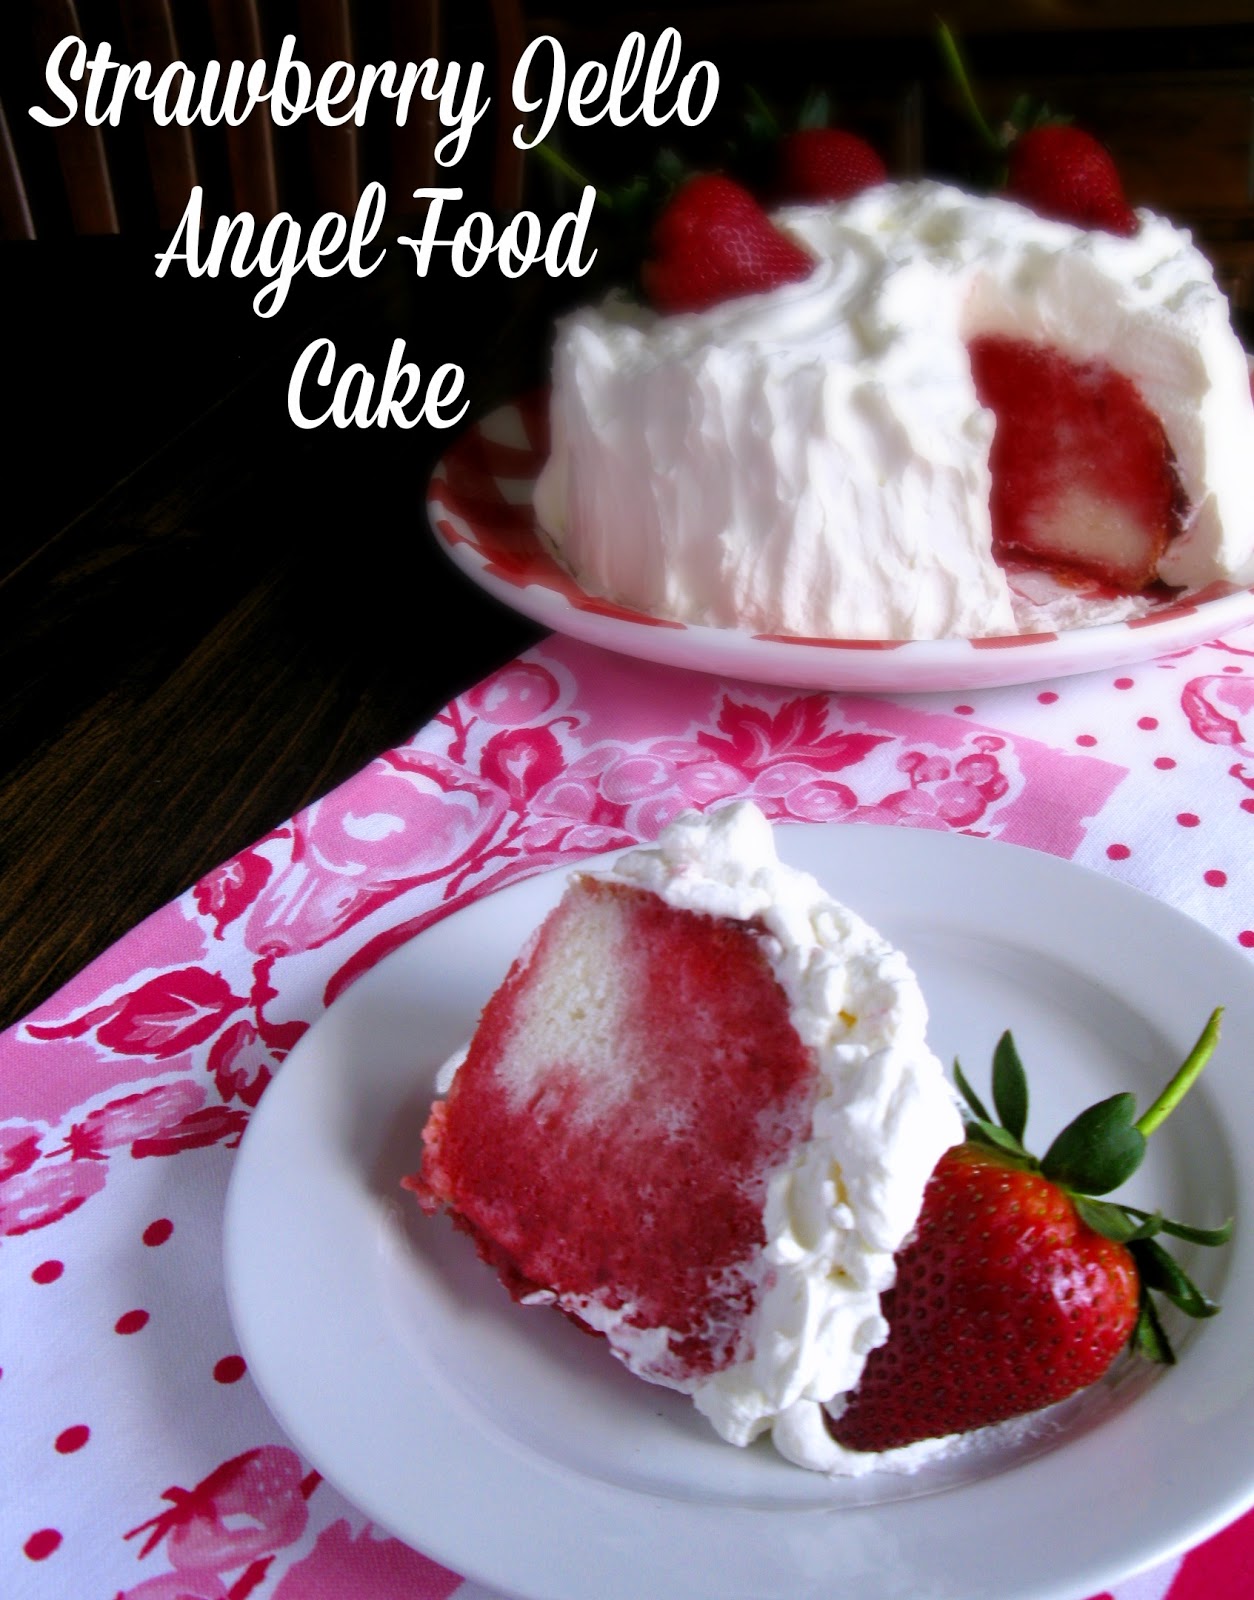 Strawberry Jello Angel Food Cake A Vintage Recipe From My Tupperware Party Days